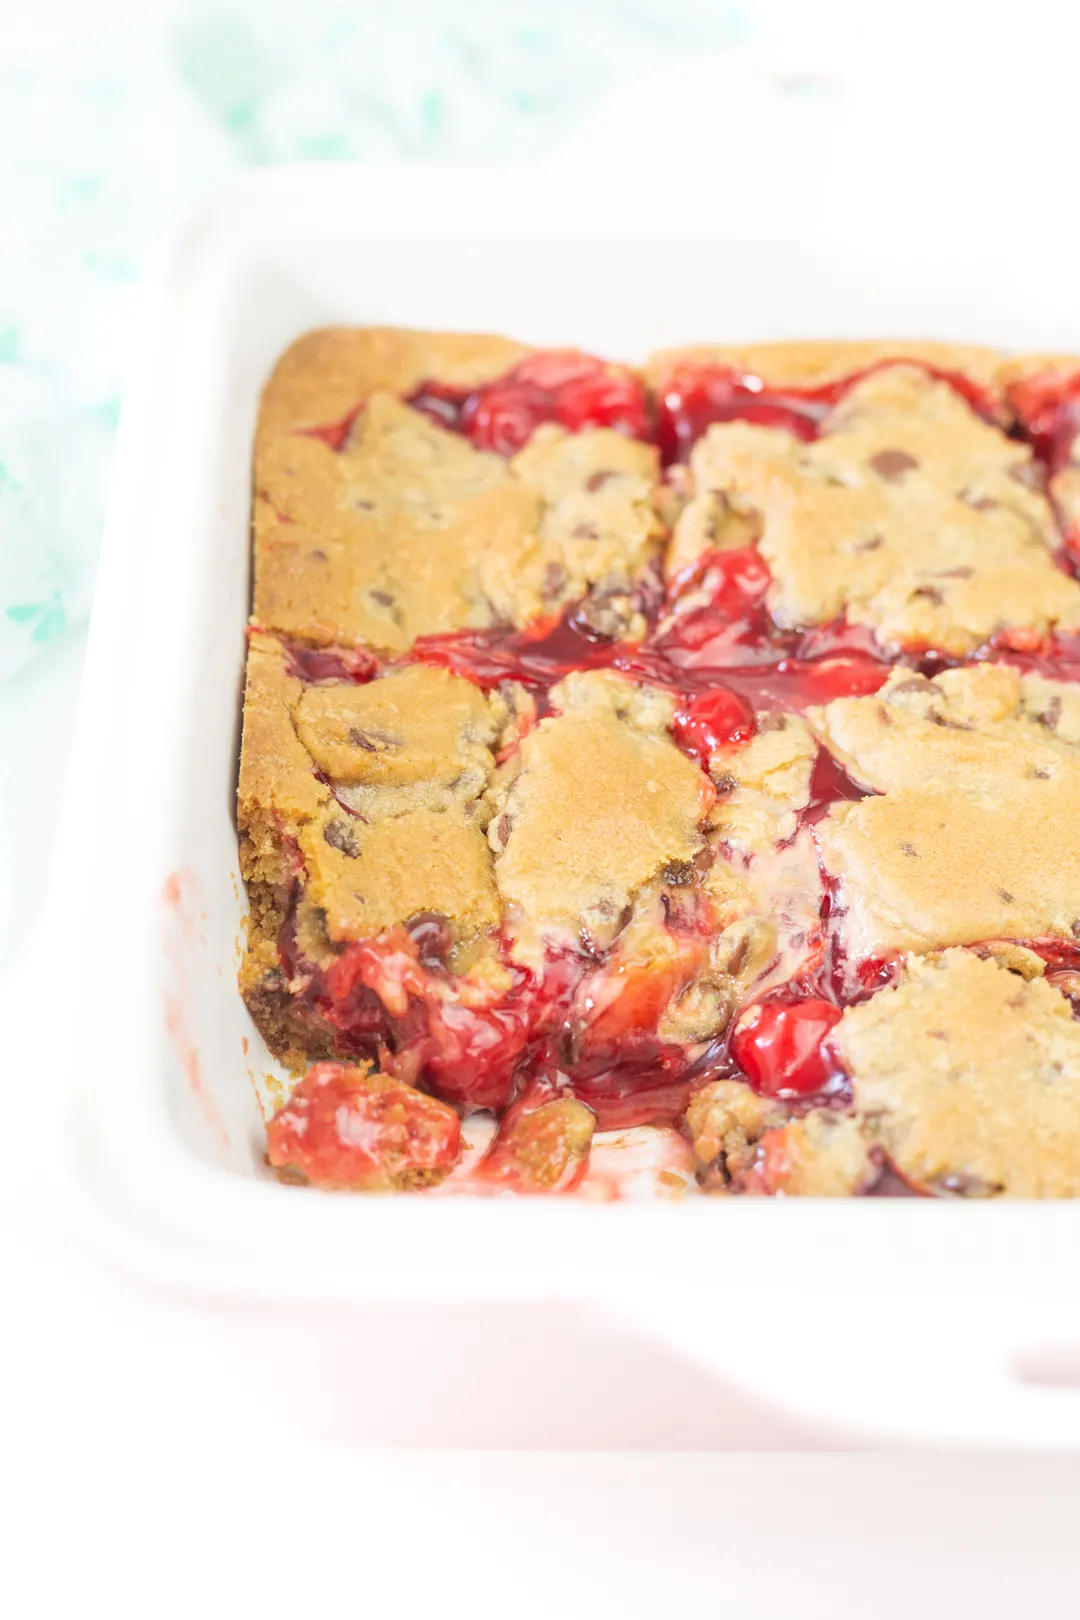 chocolate chip cherry bars up close with oozy cherry filling